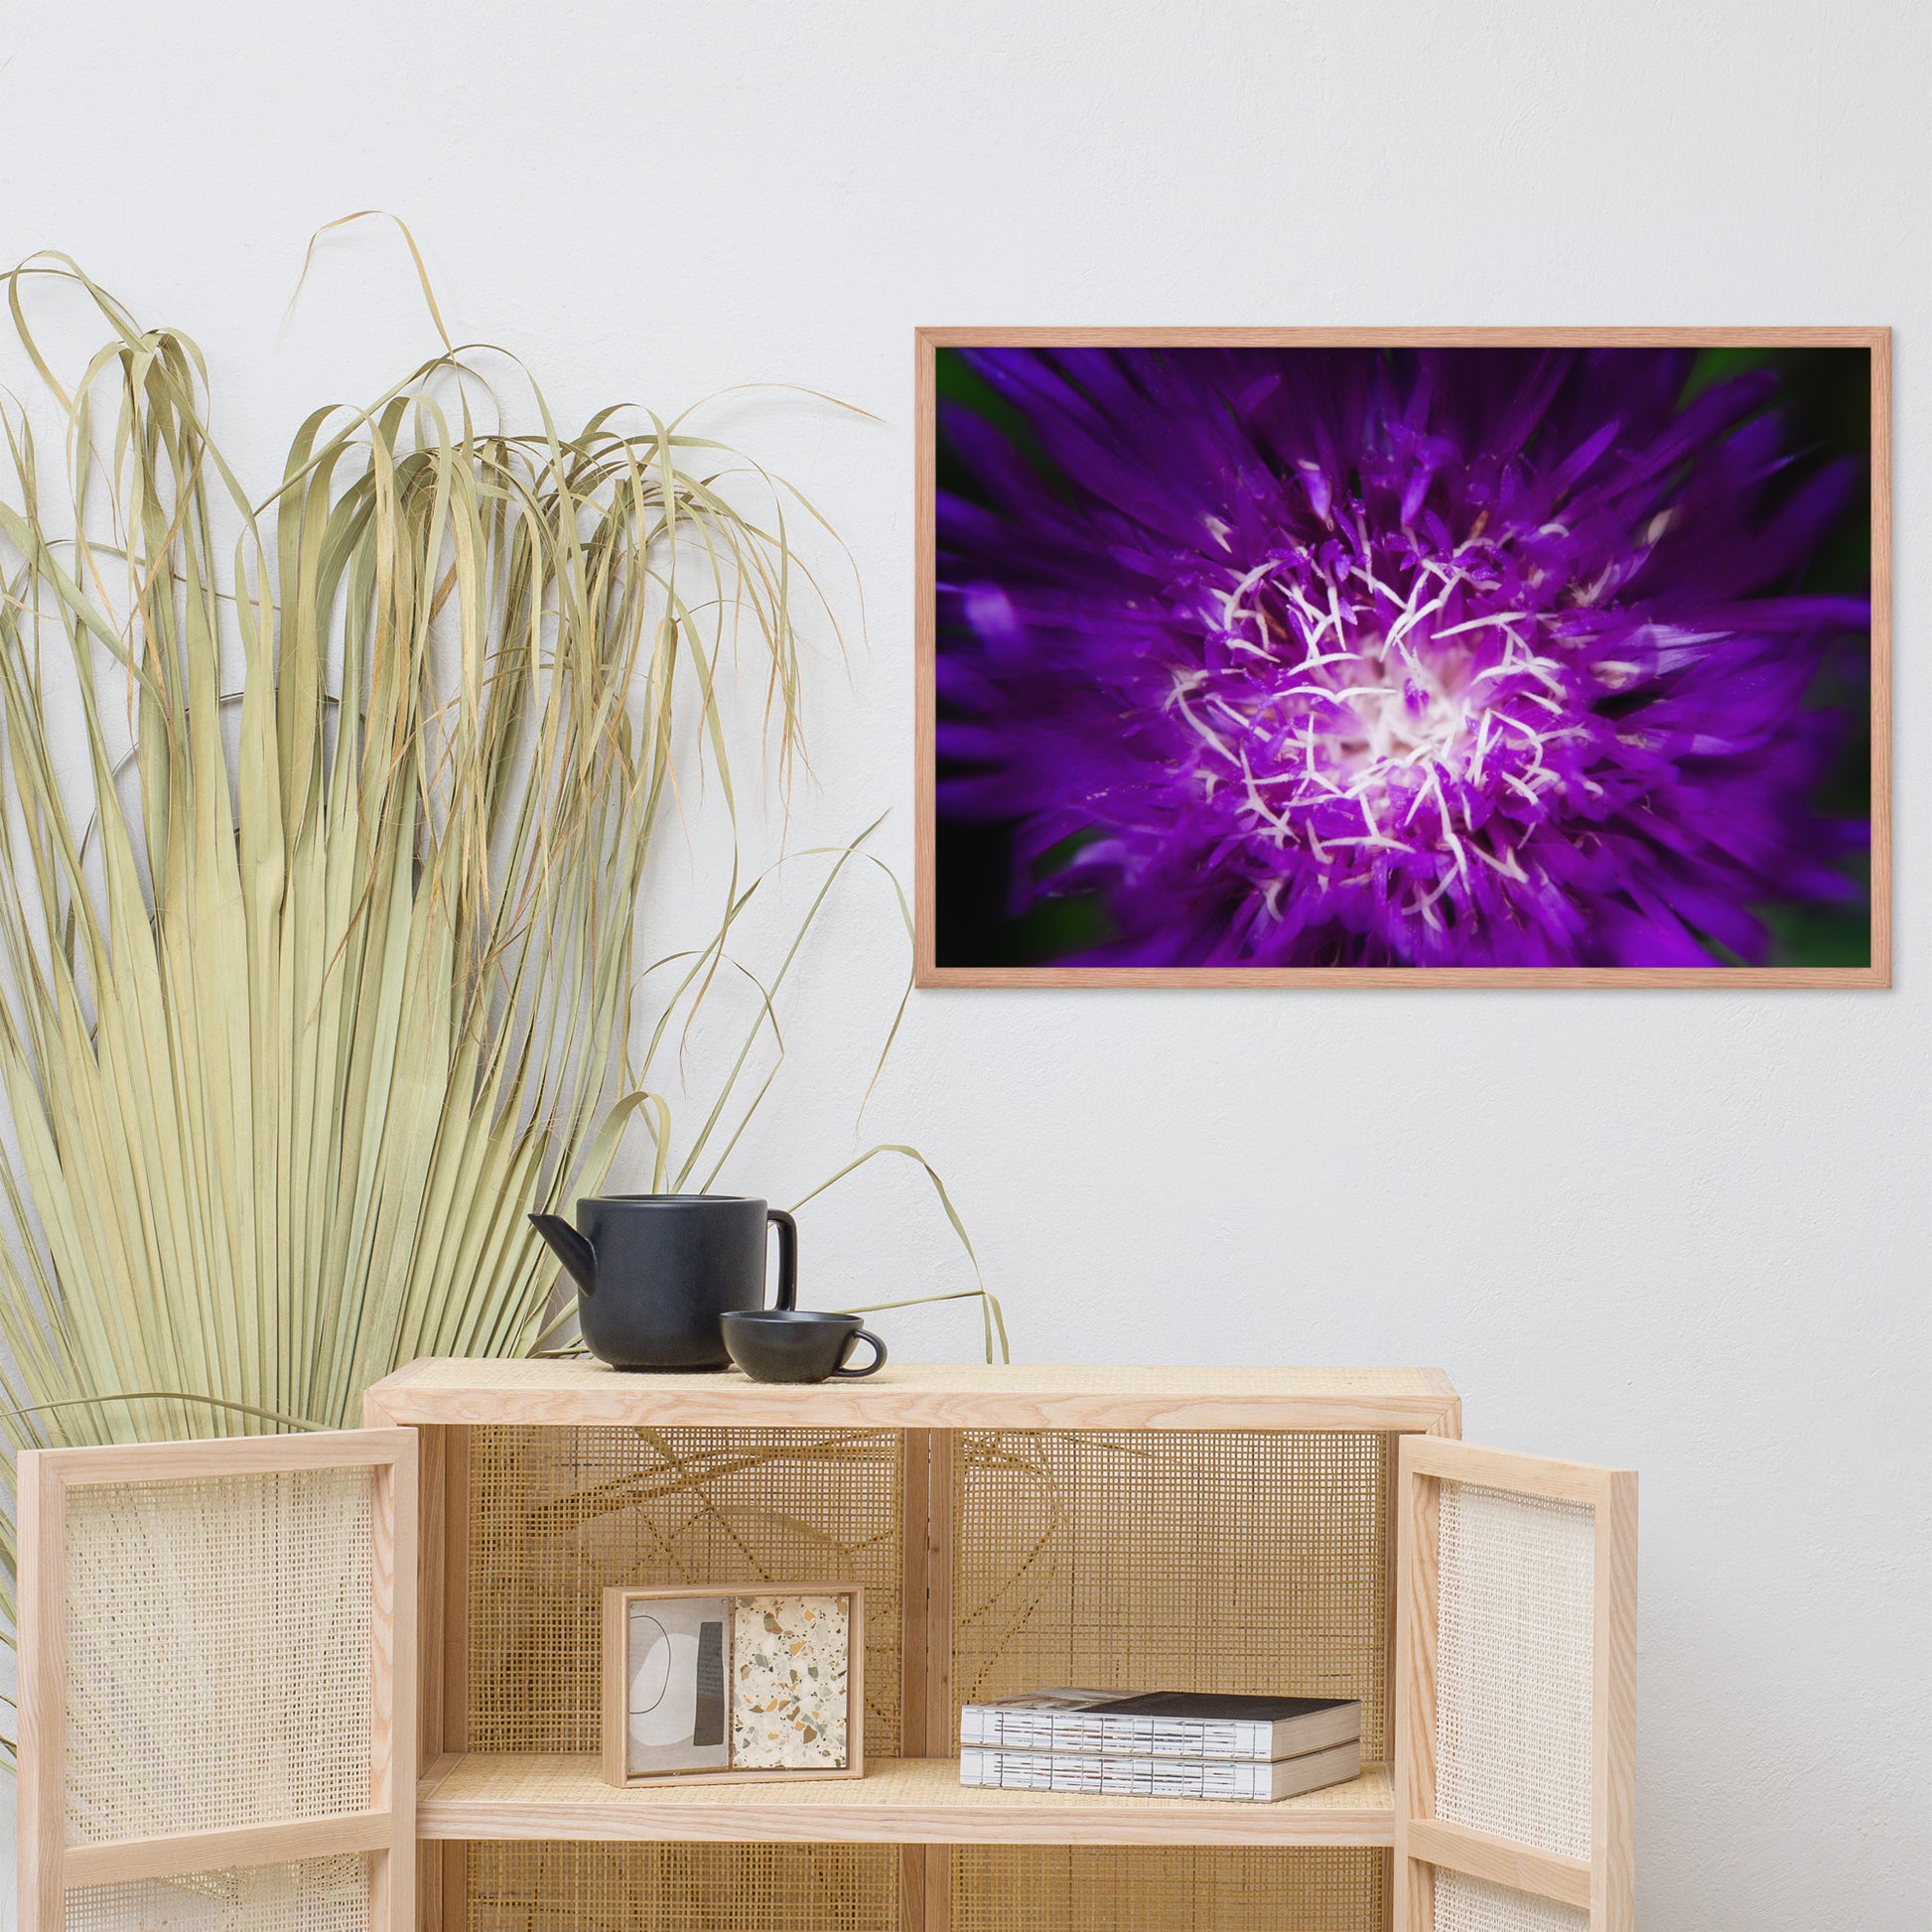 Abstract Living Room: Purple Abstract Flower - Botanical / Floral / Flora / Flowers / Nature Photograph Framed Wall Art Print - Artwork - Wall Decor